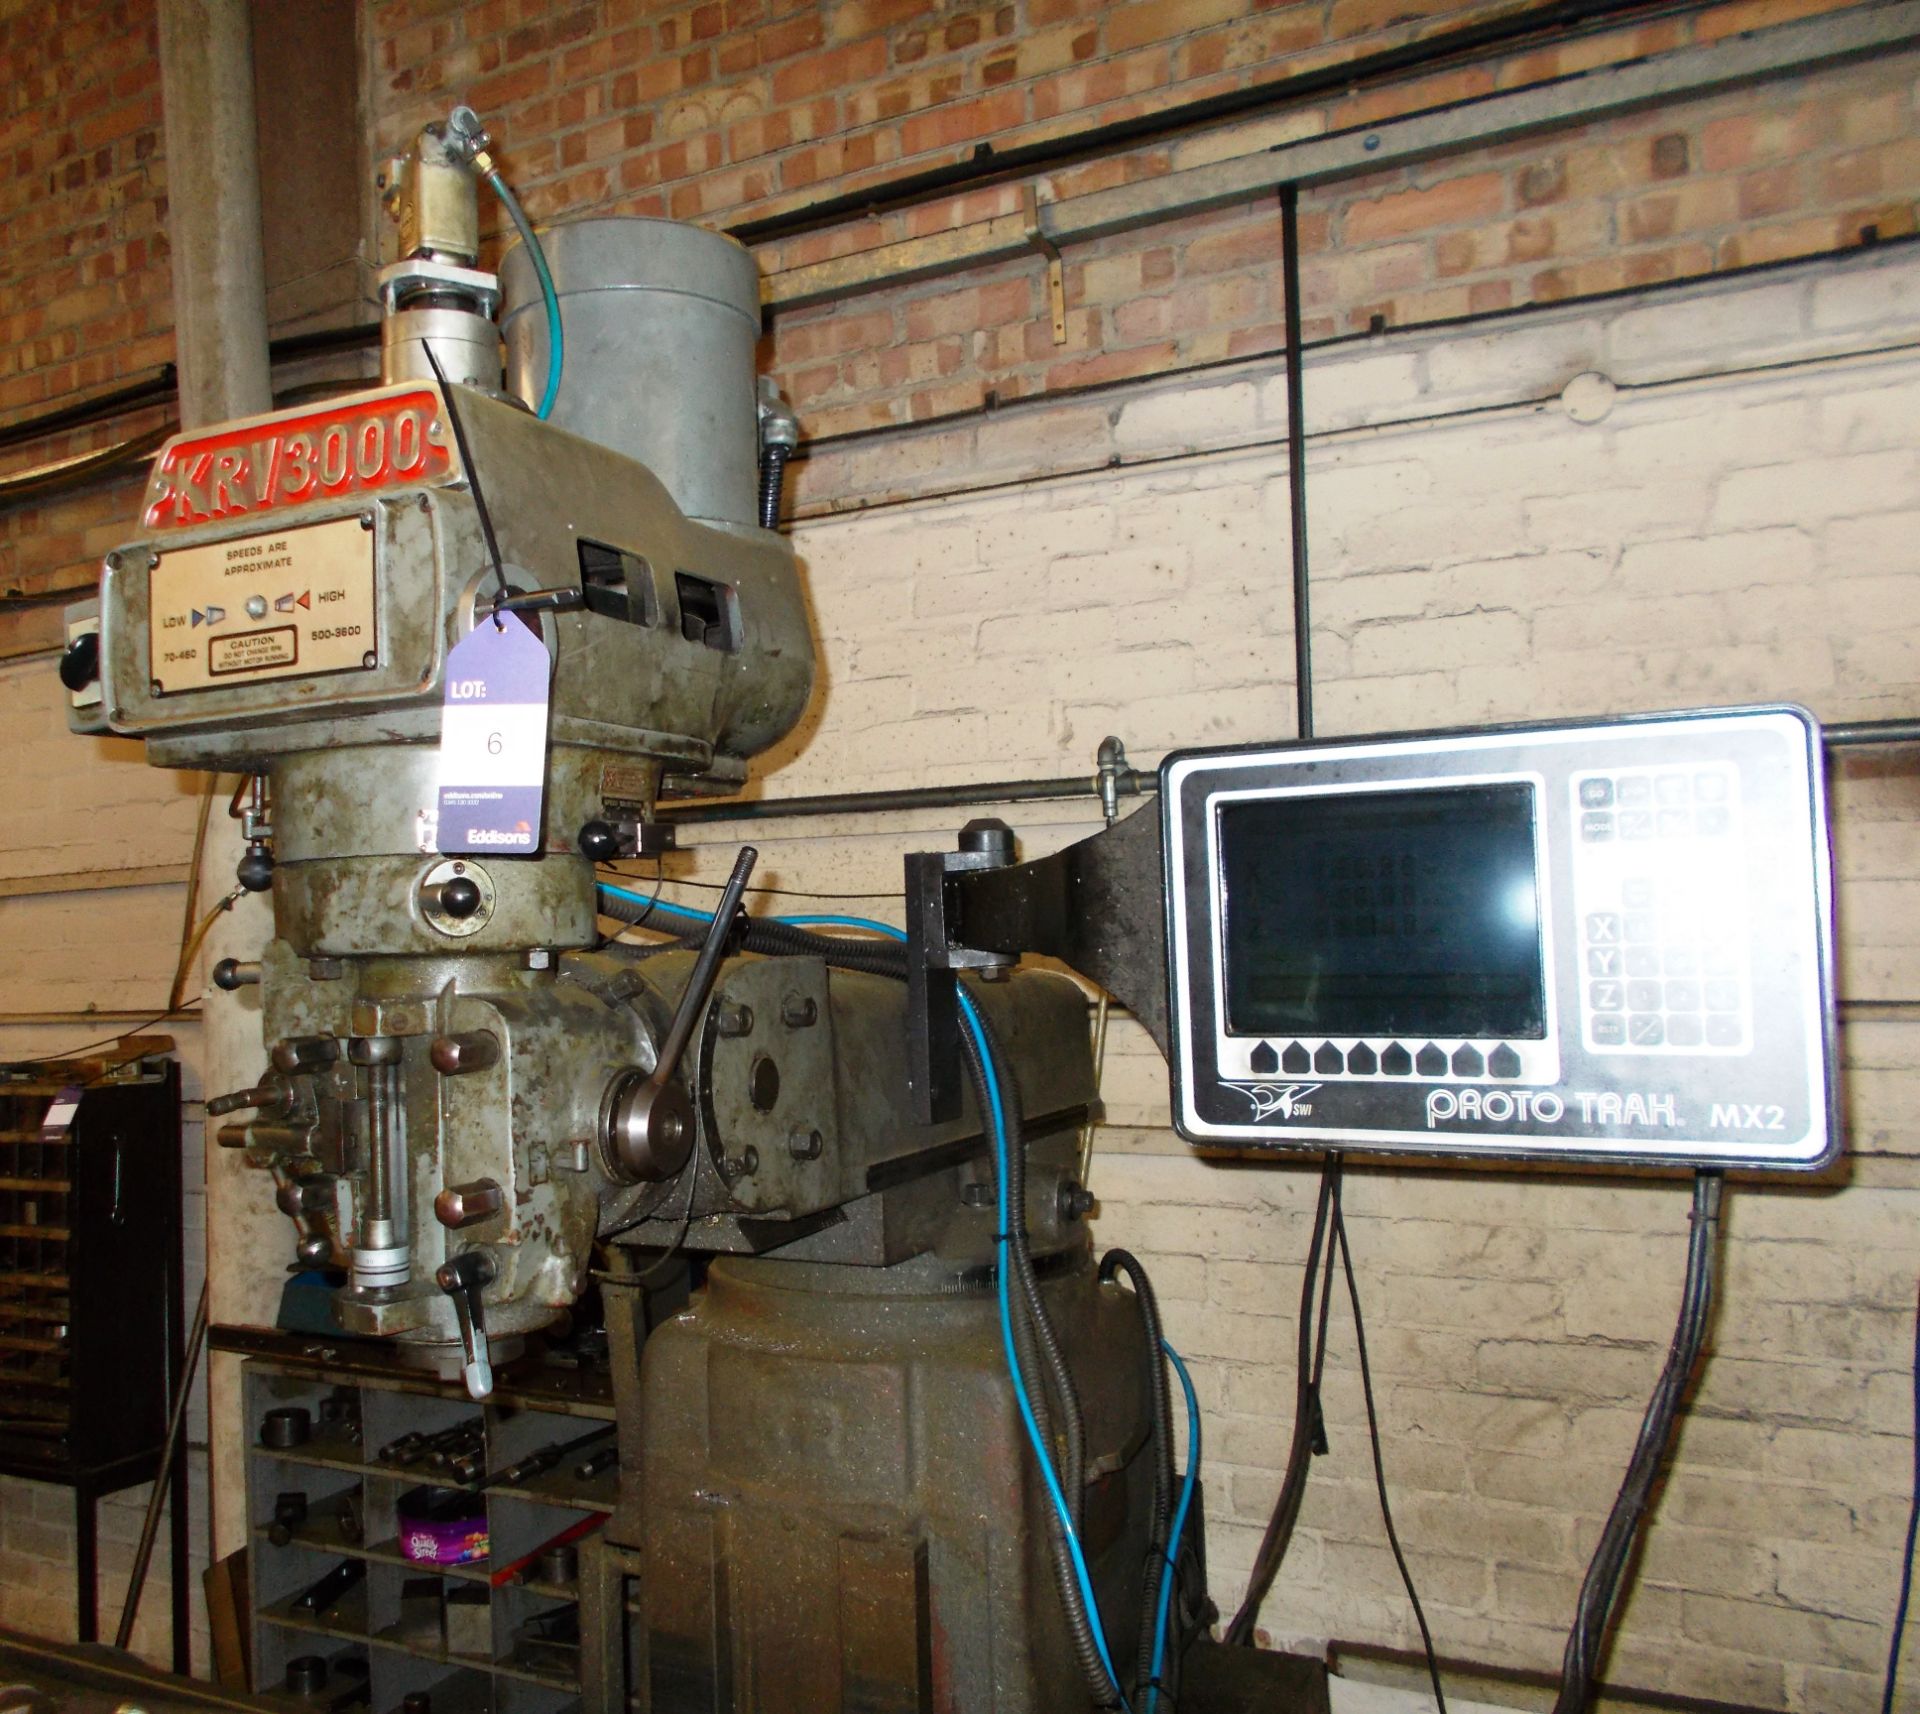 XYZ KRV3000 turret mill (Serial Number: 7348) with ProtoTrak MX2 3 axis DRO - Image 3 of 6